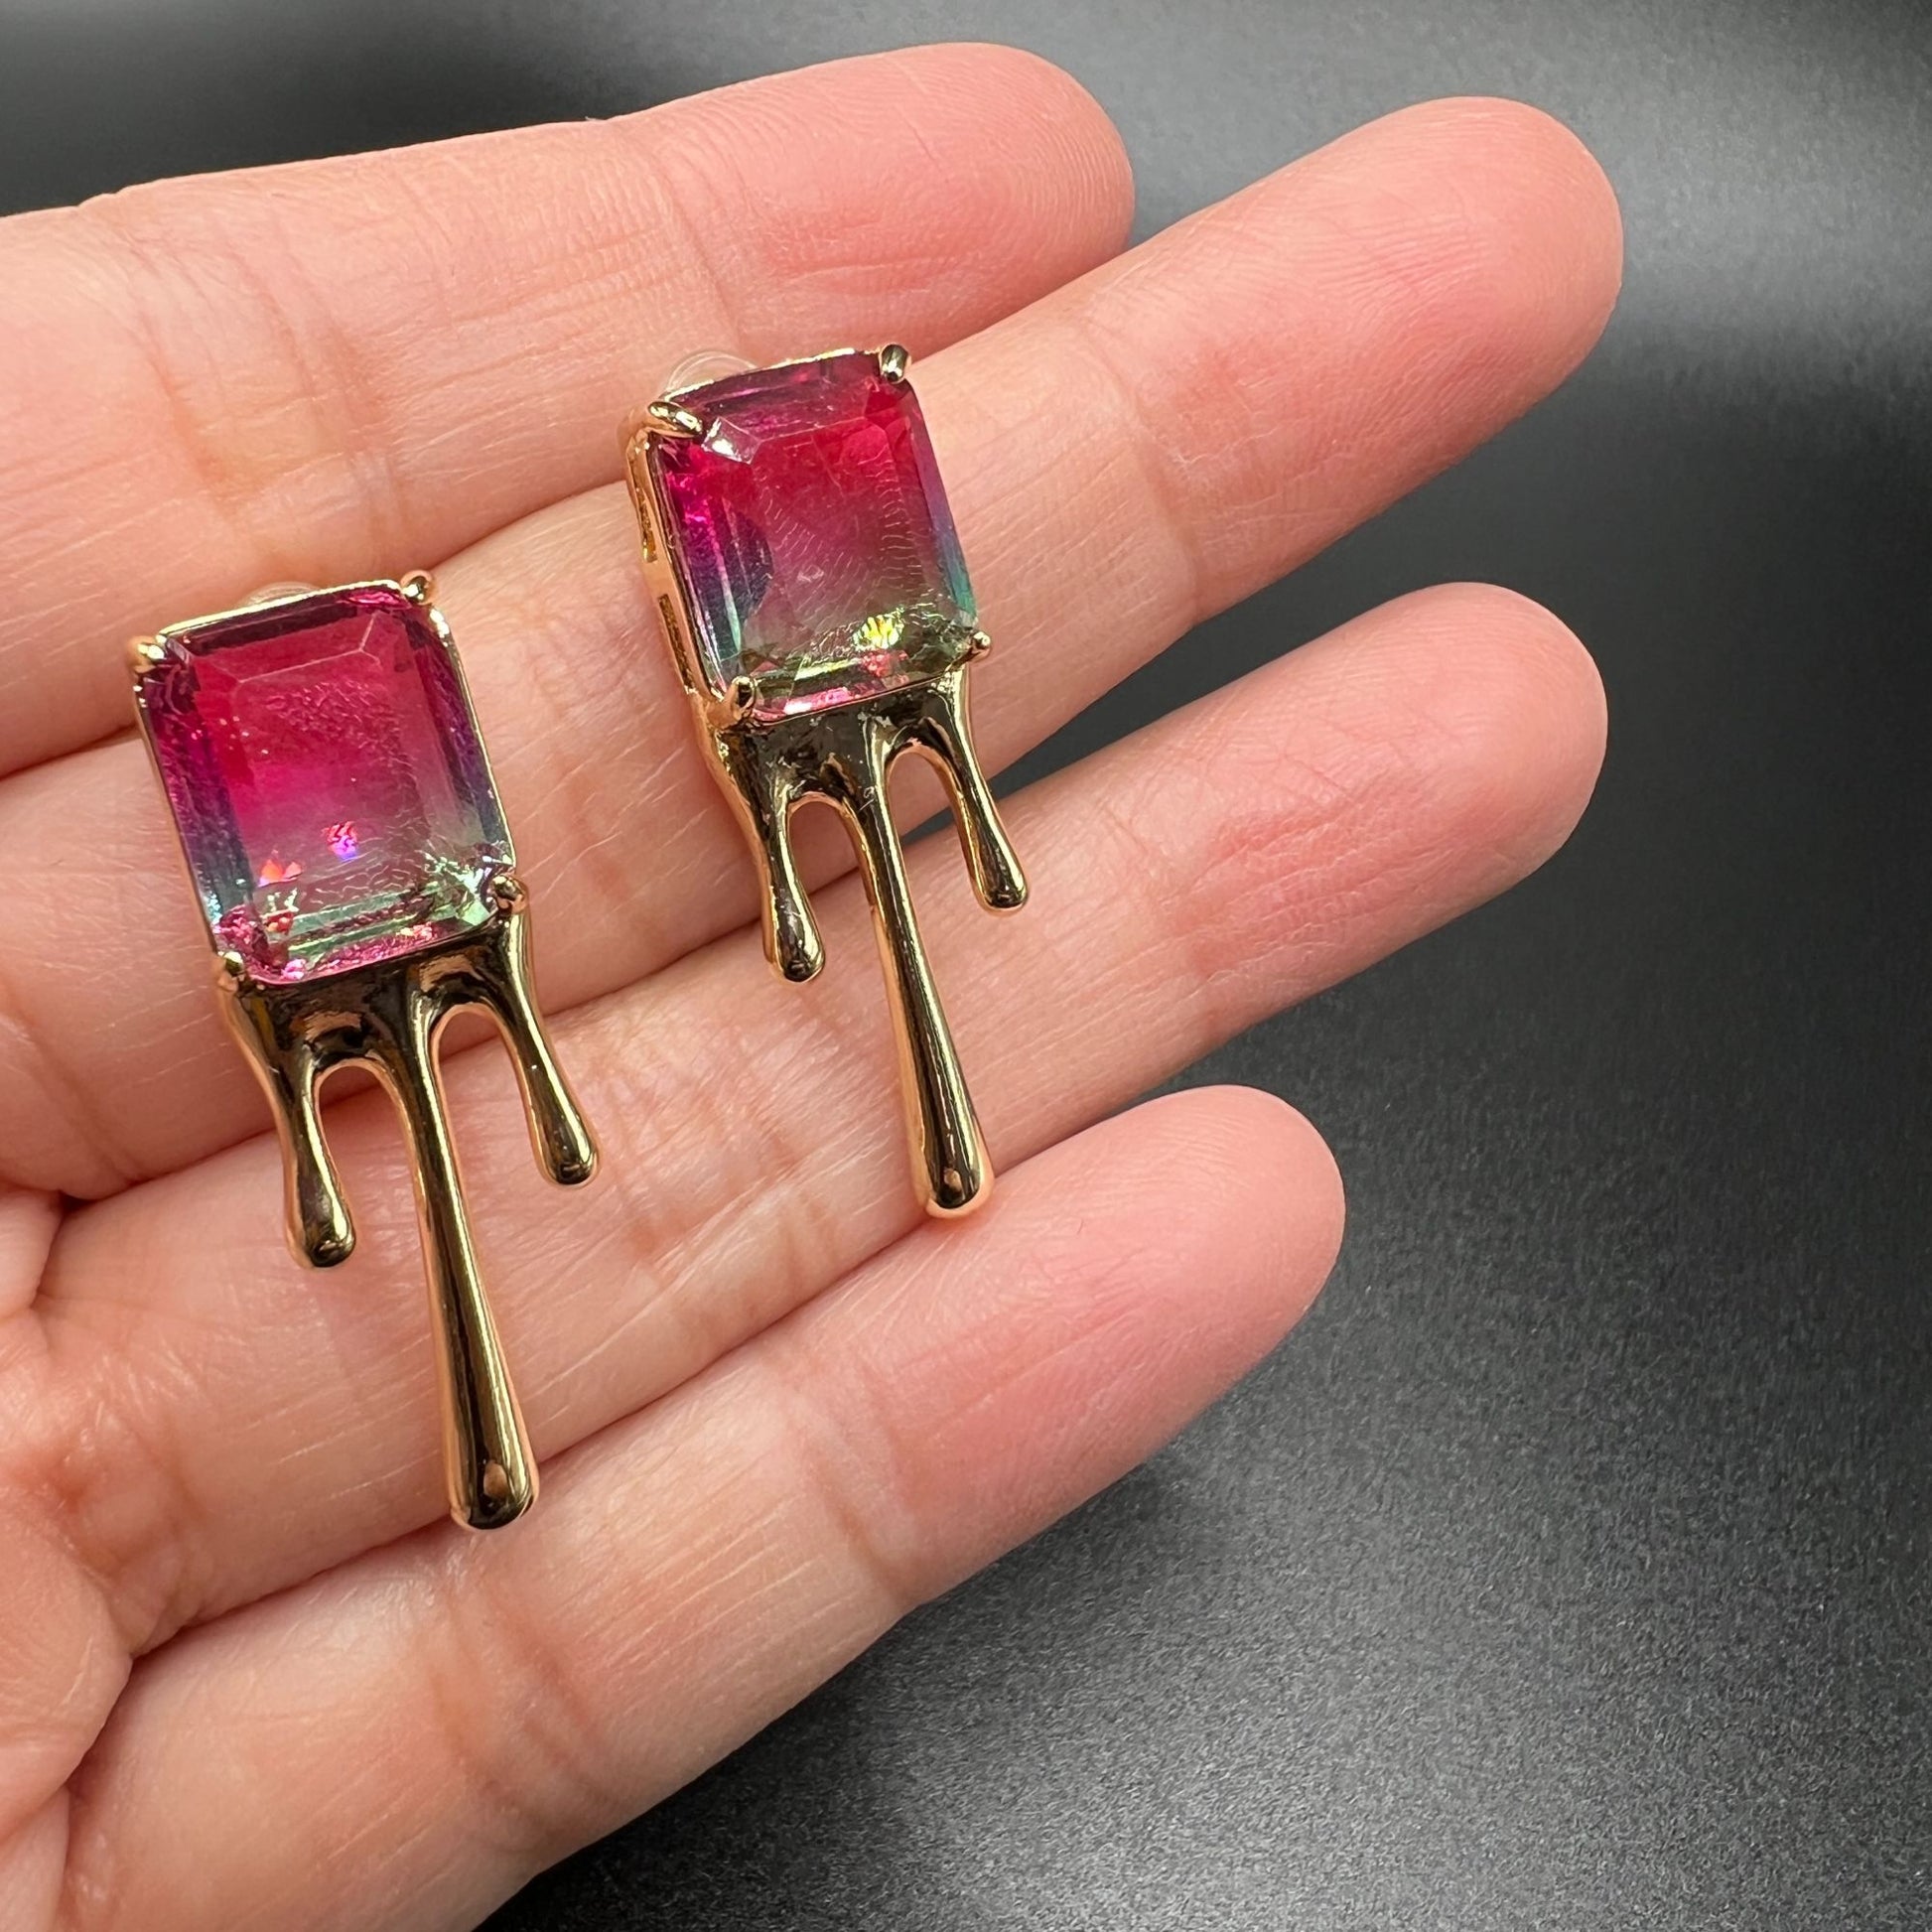 Gold metal earrings with melted design and large pink/green imitation watermelon tourmaline stones. Displayed on a hand with a close-up view of  the gems.